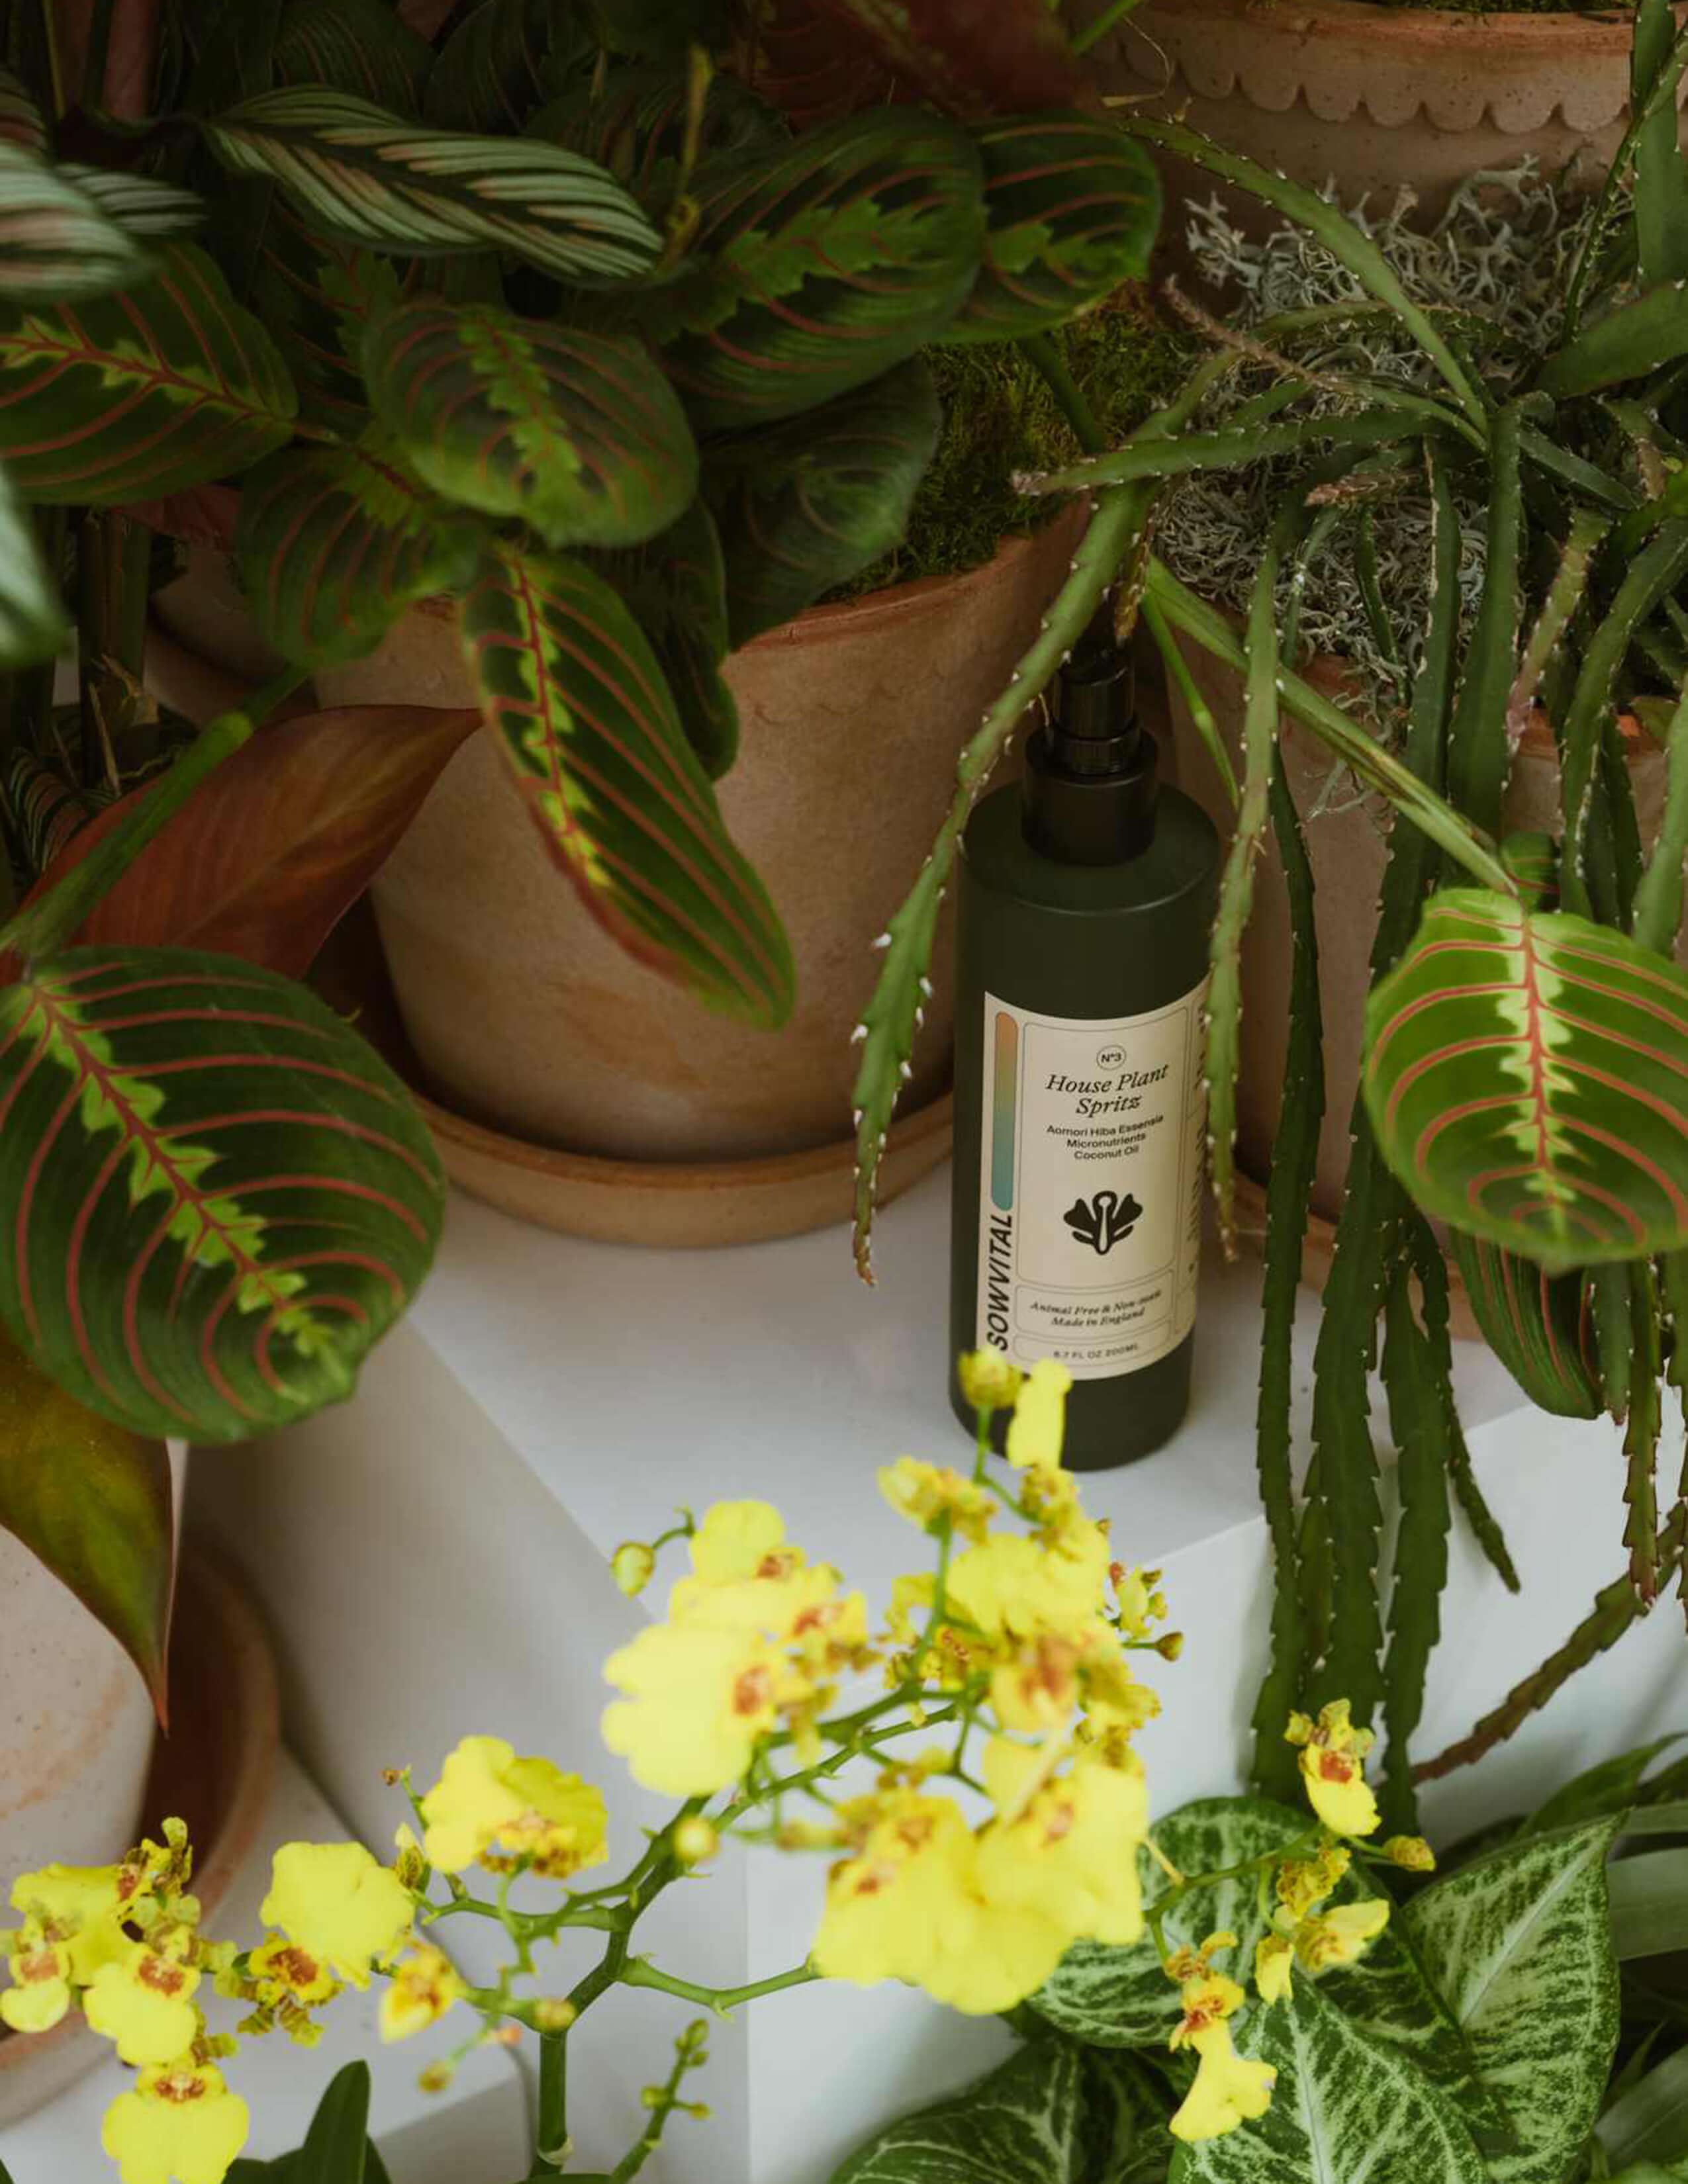 The Sowvital product - house plant spritz surrounded by Maranta Fascinator, cactus, Syngonium Batik, and Dancing Lady.